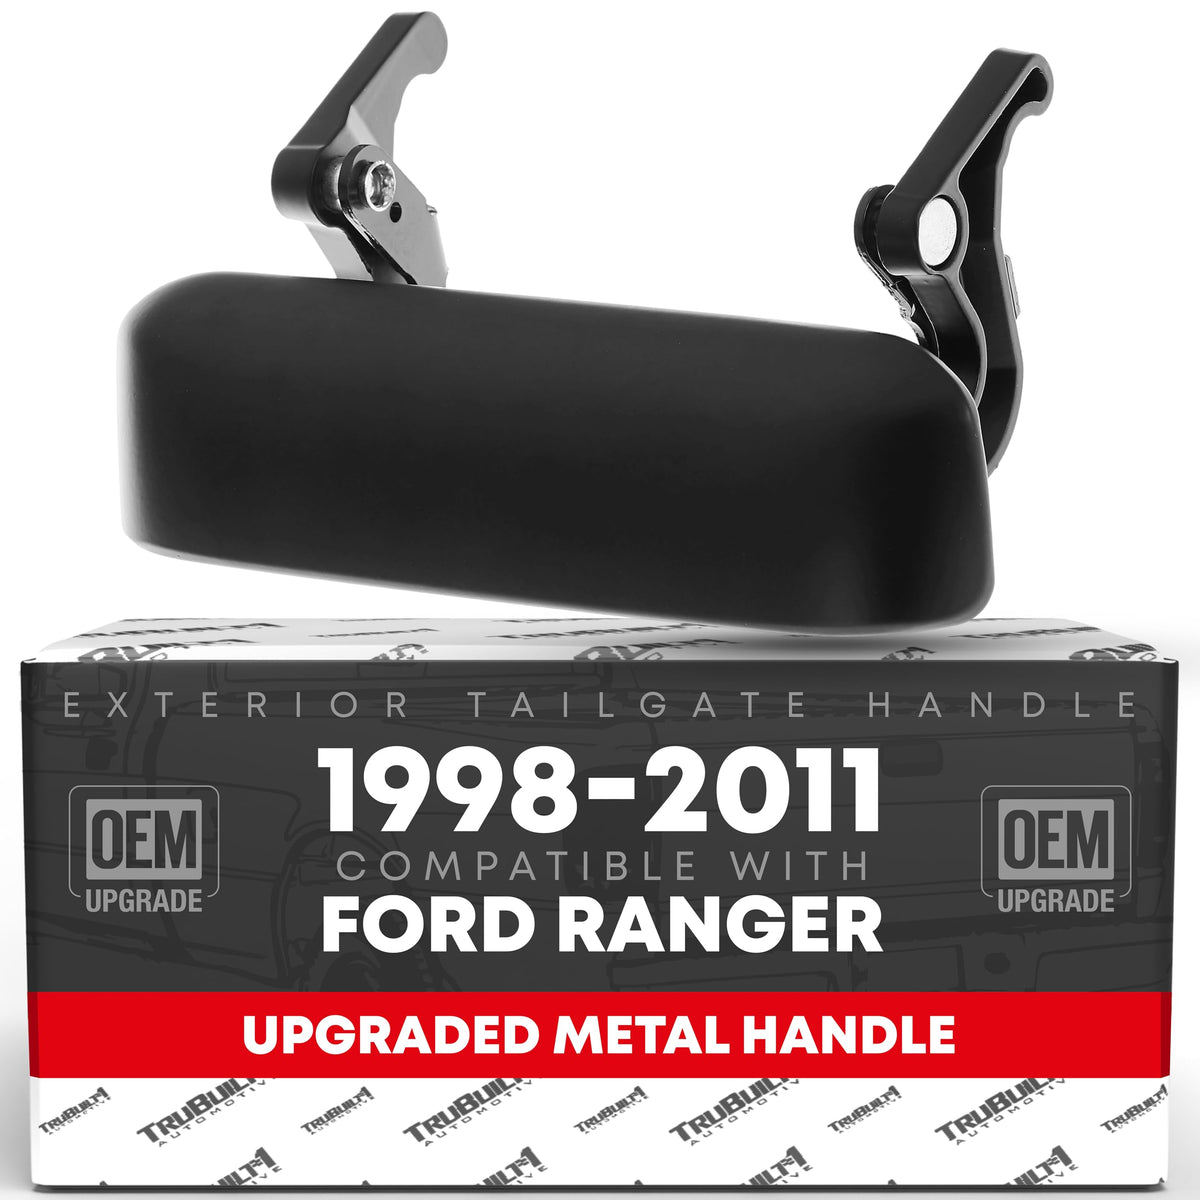 TRUBUILT1 AUTOMOTIVE Exterior Tailgate Door Handle for 1998-2011 Ford Ranger - Smooth Metal OEM Style Finish - OEM Part # XL5Z-9943400-AAA, 1L5Z9943400AAA, FO1915109, 77872, 90695